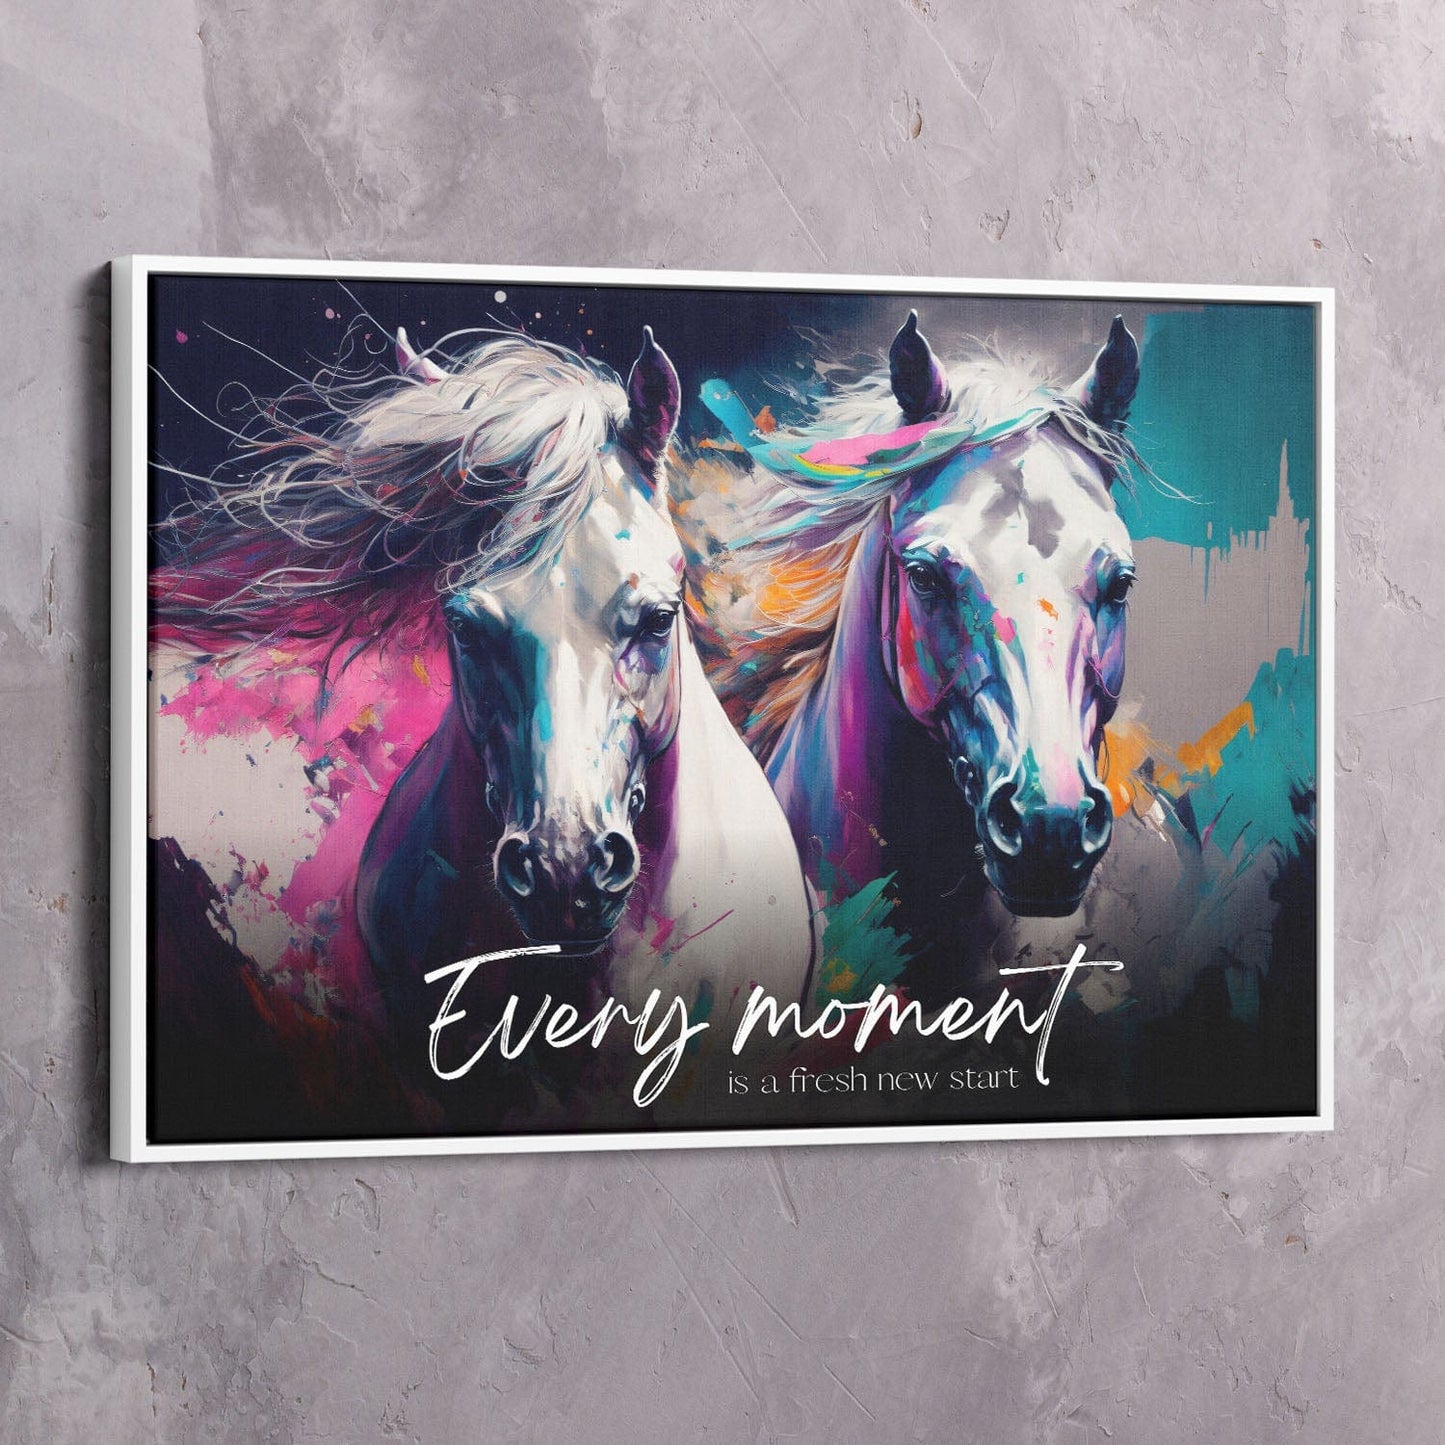 Abstract Horses Painting - Every moment is a fresh new start quote Wall Art | Inspirational Wall Art Motivational Wall Art Quotes Office Art | ImpaktMaker Exclusive Canvas Art Landscape